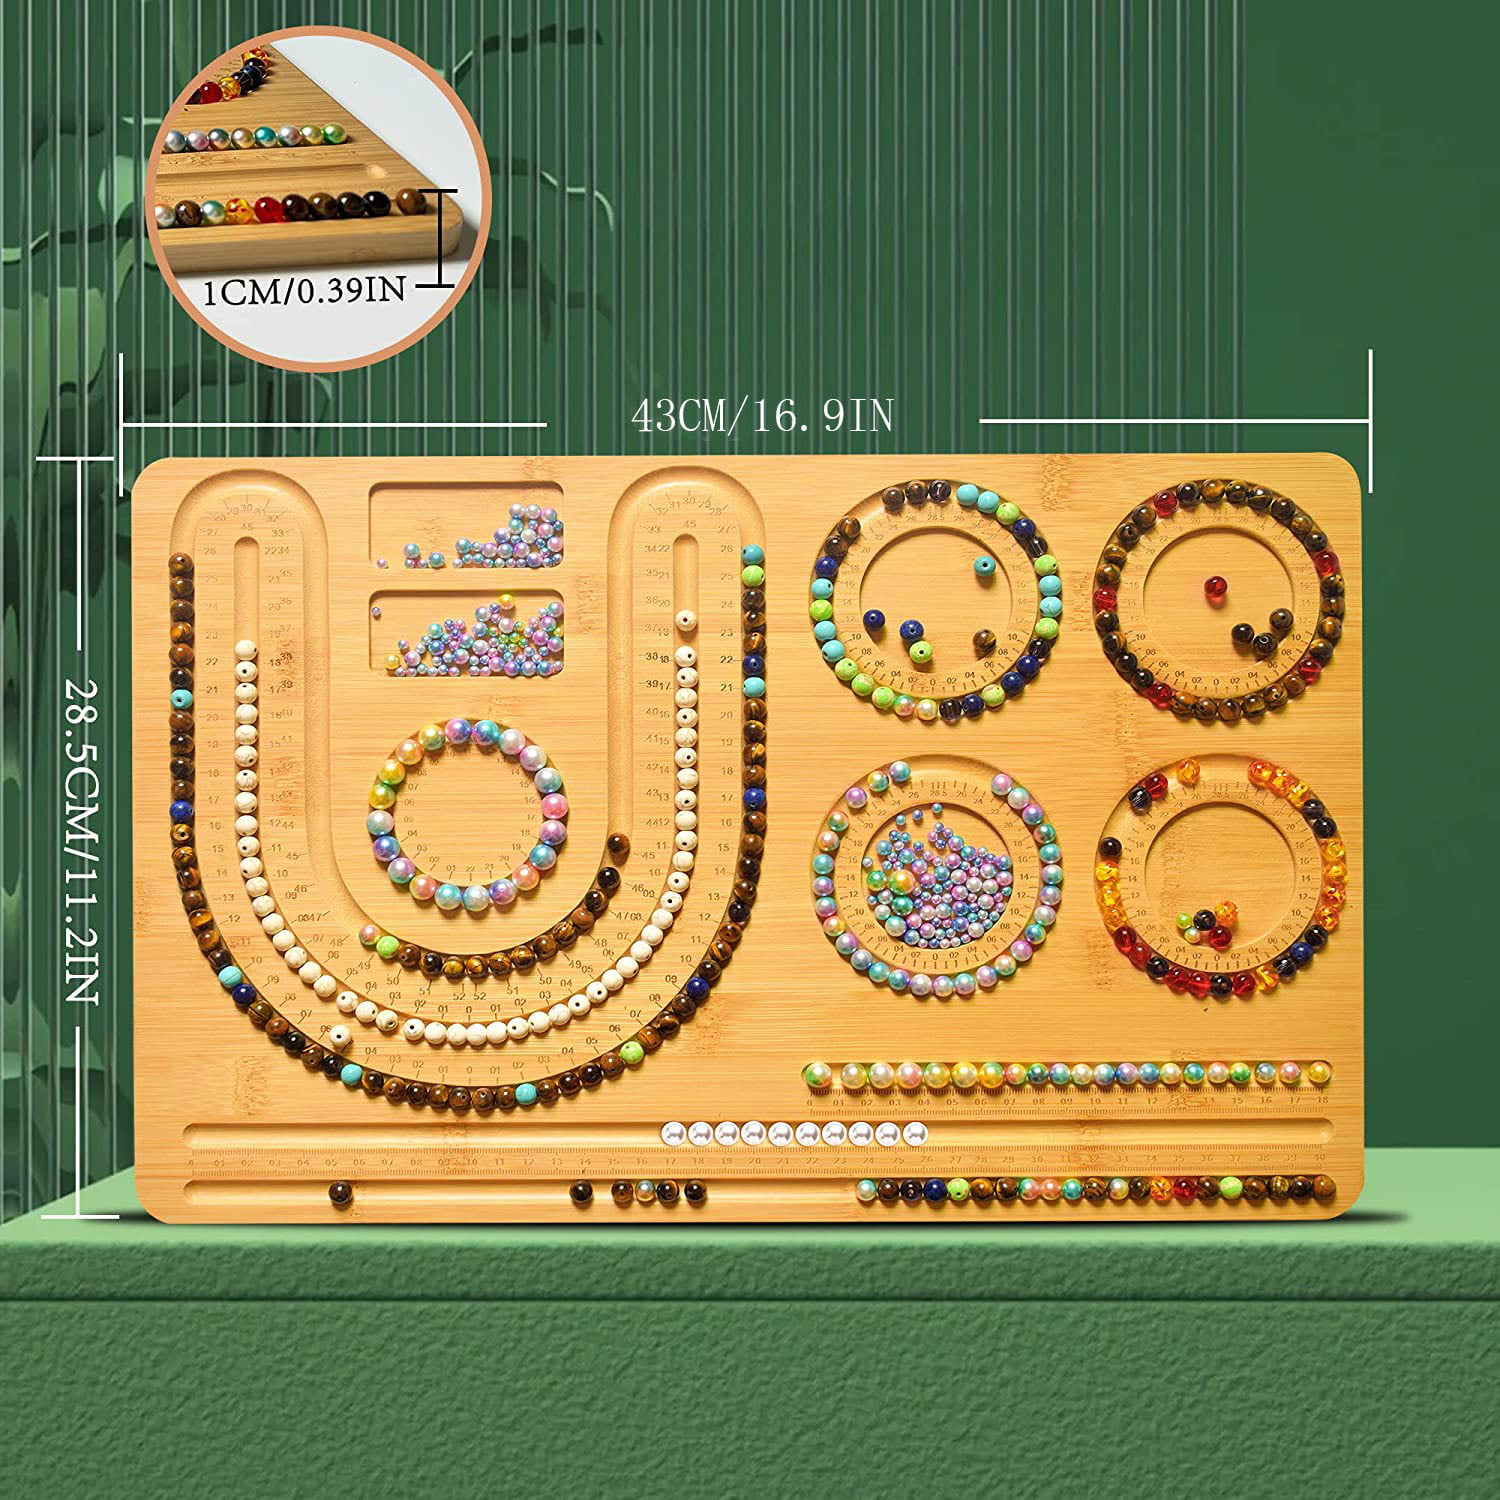 Wednesday Bamboo Beading Board for Jewelry Making - Bracelet and Necklace Design with Bead Mats - DIY Bamboo Bead Board for Creative Designs-Large